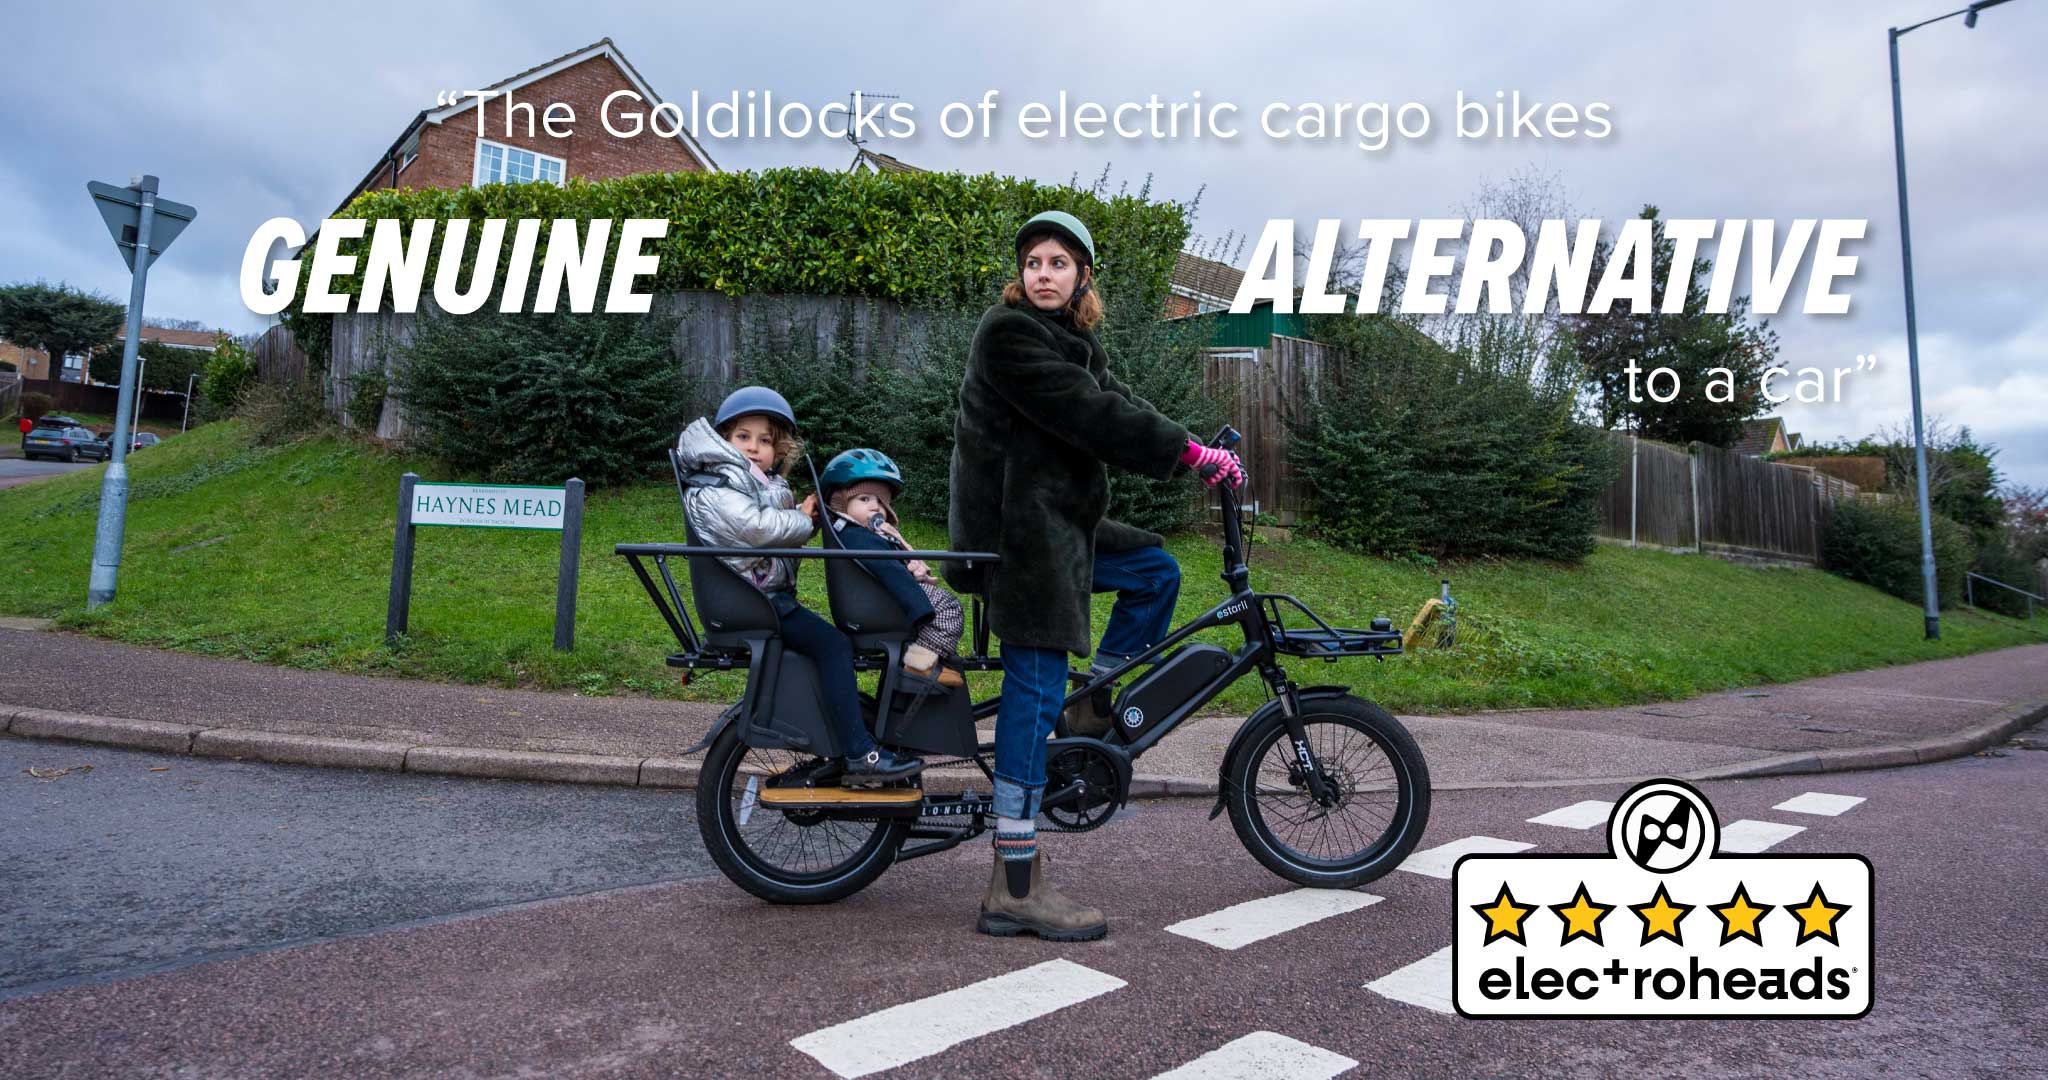 The Estarli e-cargo is a genuine alternative to a car. It gets a five-star rating from Electroheads.